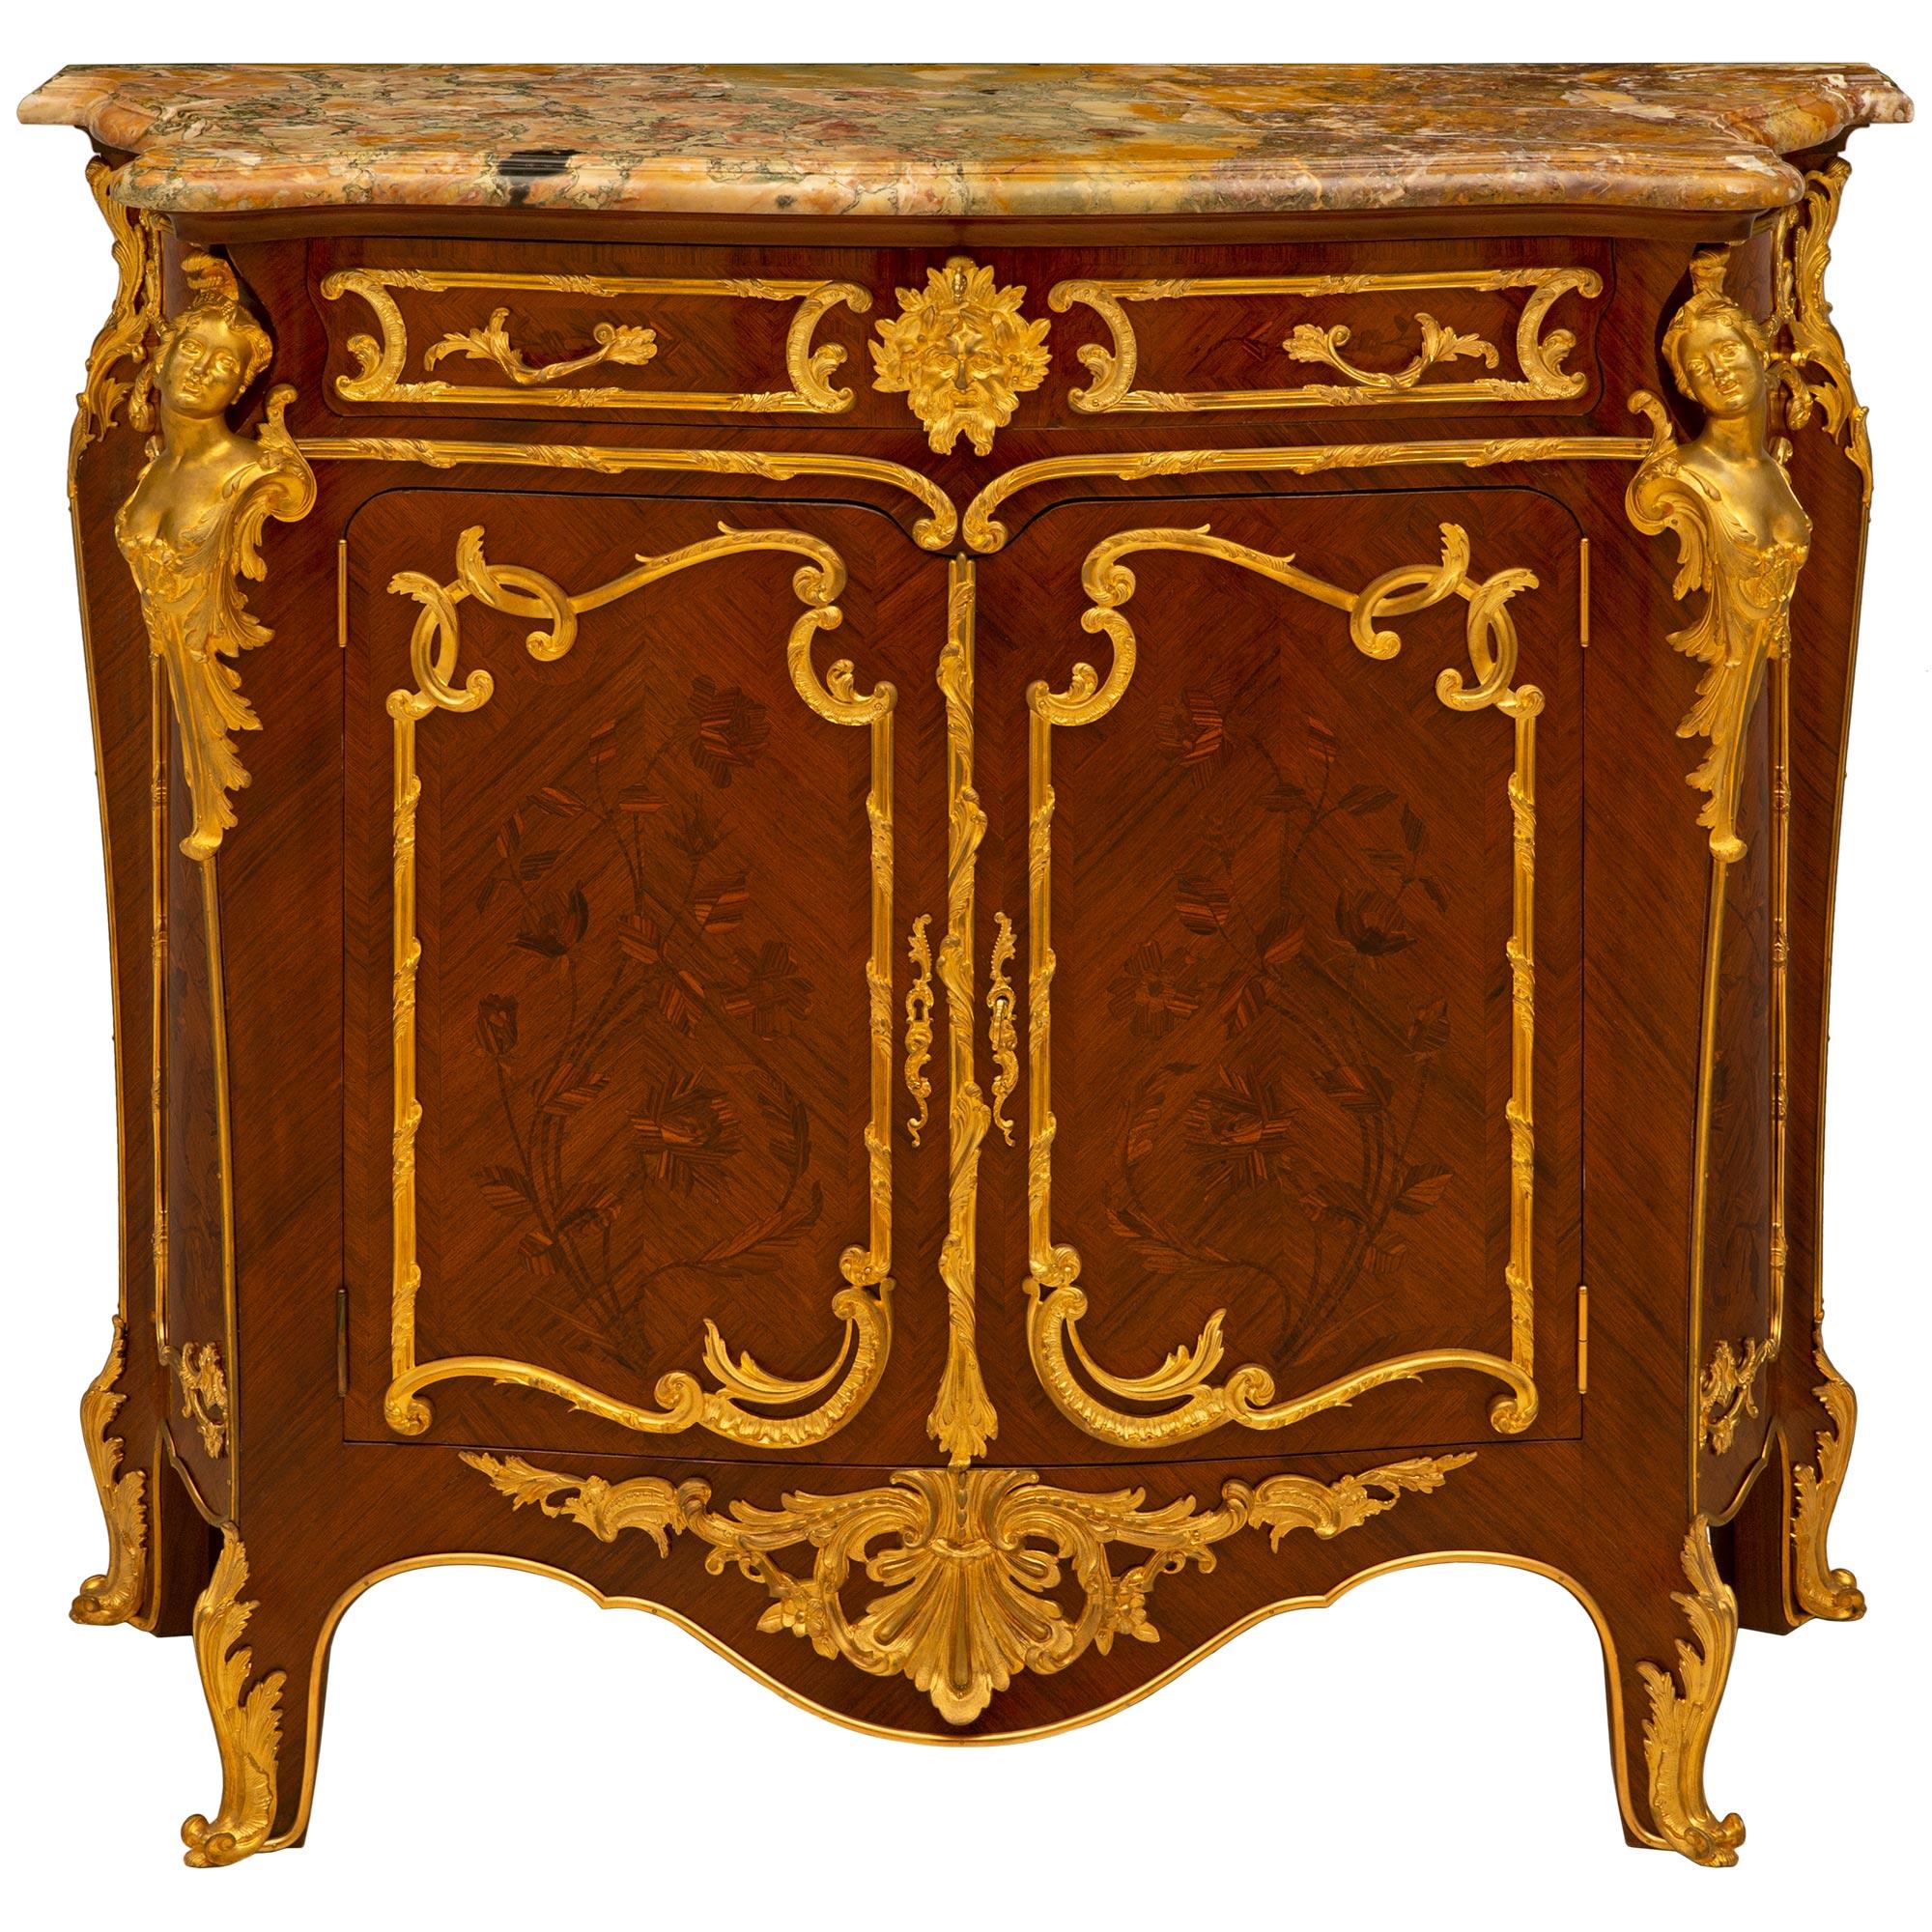 French 19th Century Louis XV Style Tulipwood Kingwood and Ormolu Cabinet For Sale 9